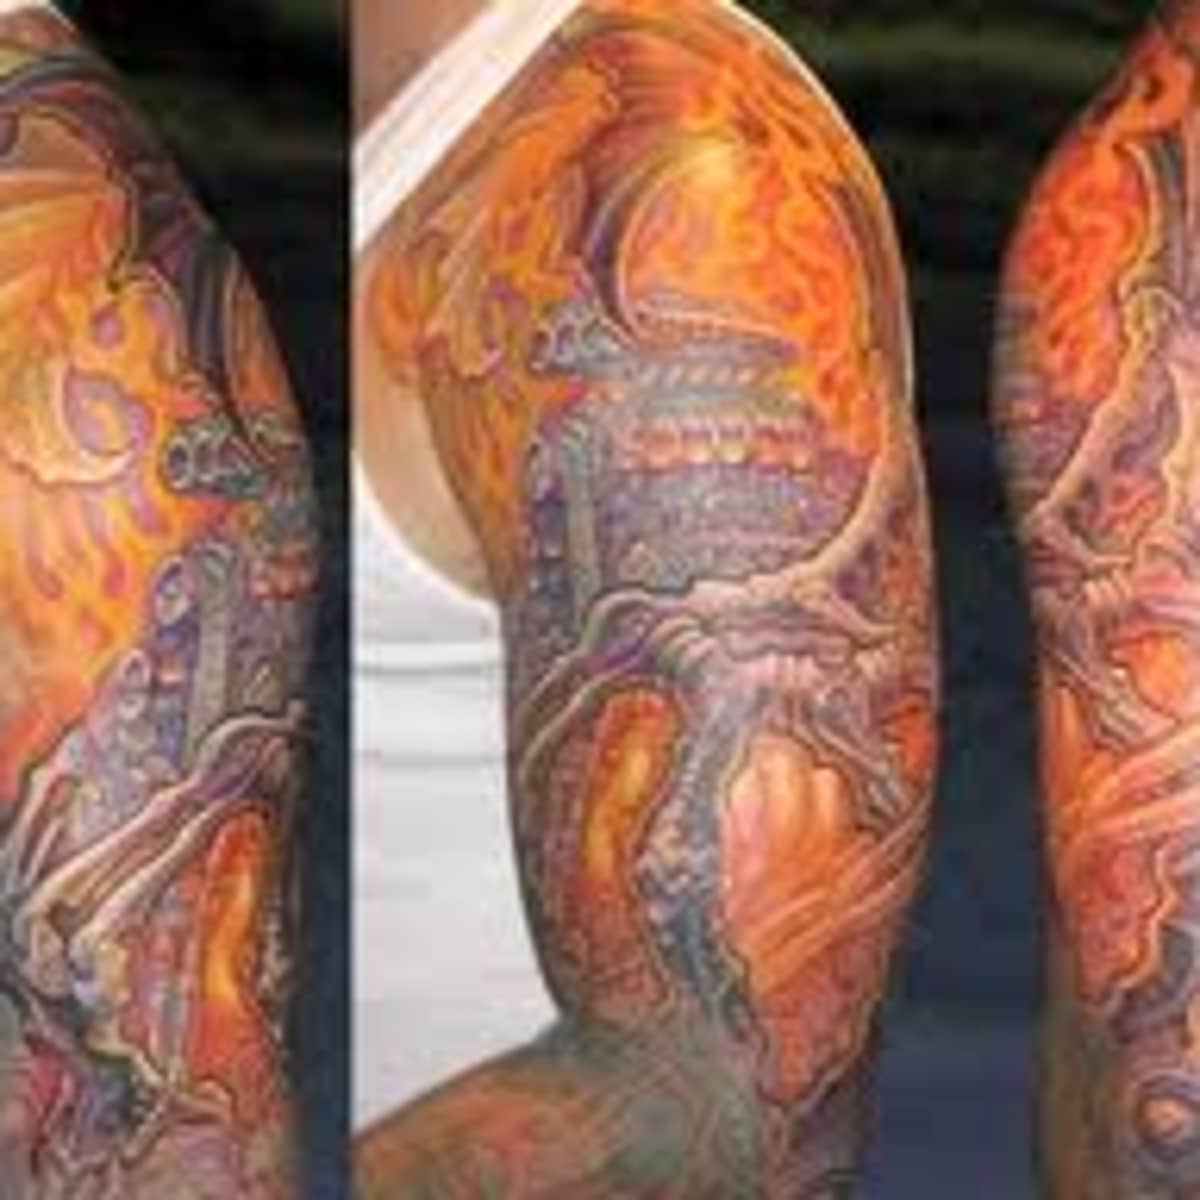 Engine Tattoos And Designs-Engine Tattoo Meanings And Ideas-Engine Tattoo  Pictures - HubPages